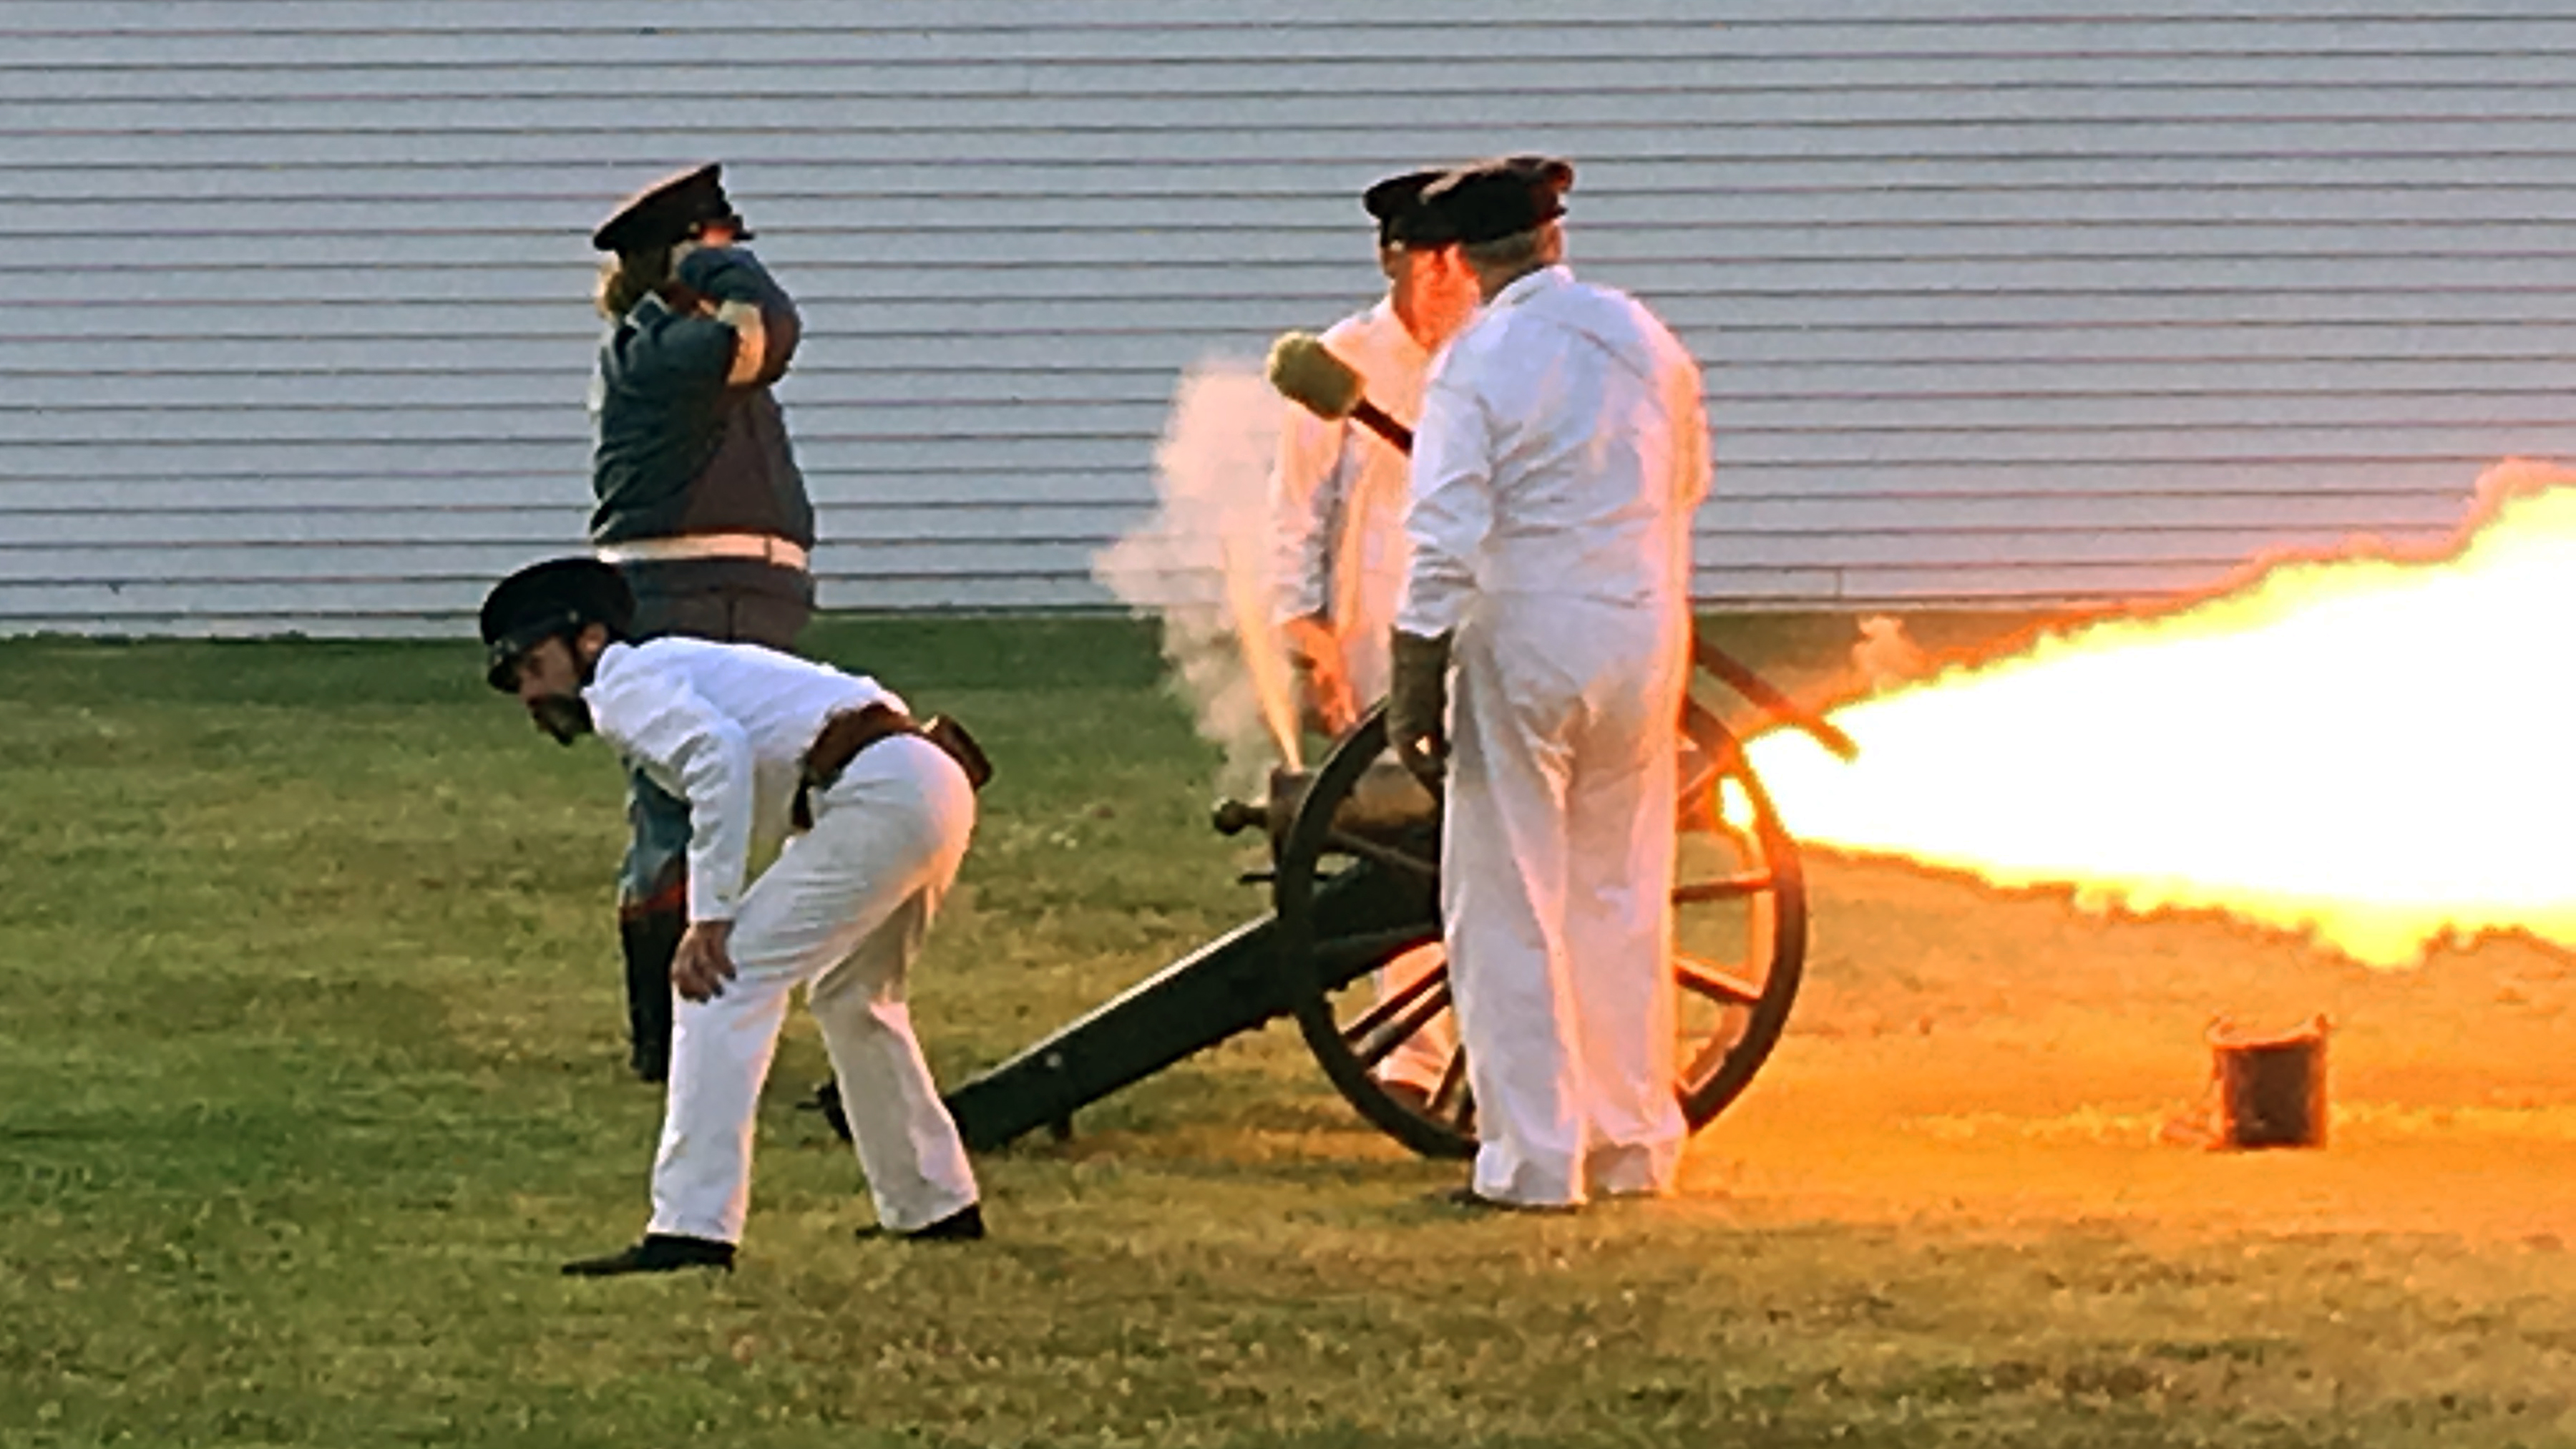 Reenactors, dressed in 1840's military uniforms, firing a 6# cannon.